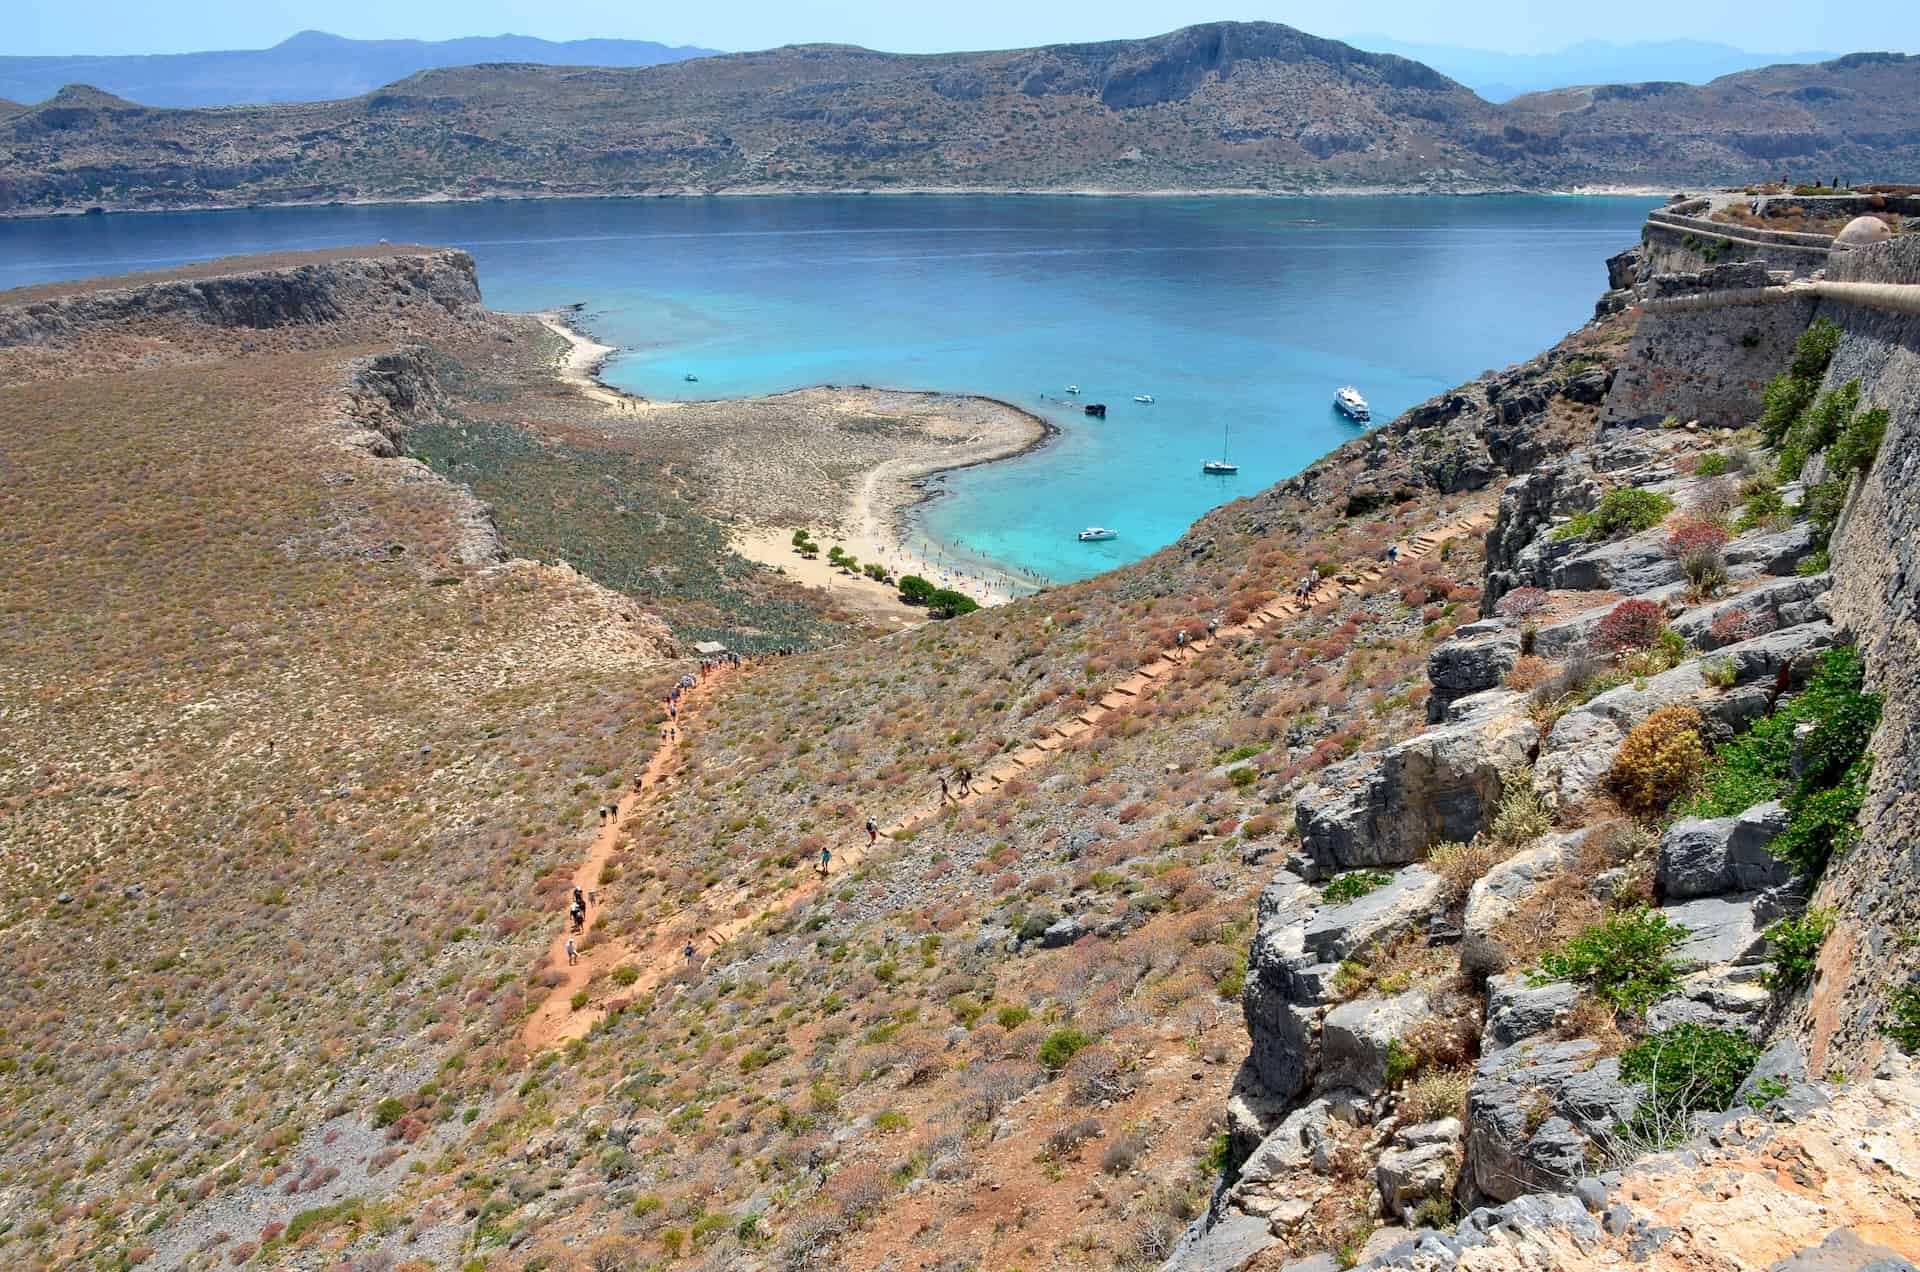 Looking down at the trail from the Venetian fortress on Gramvousa, Crete